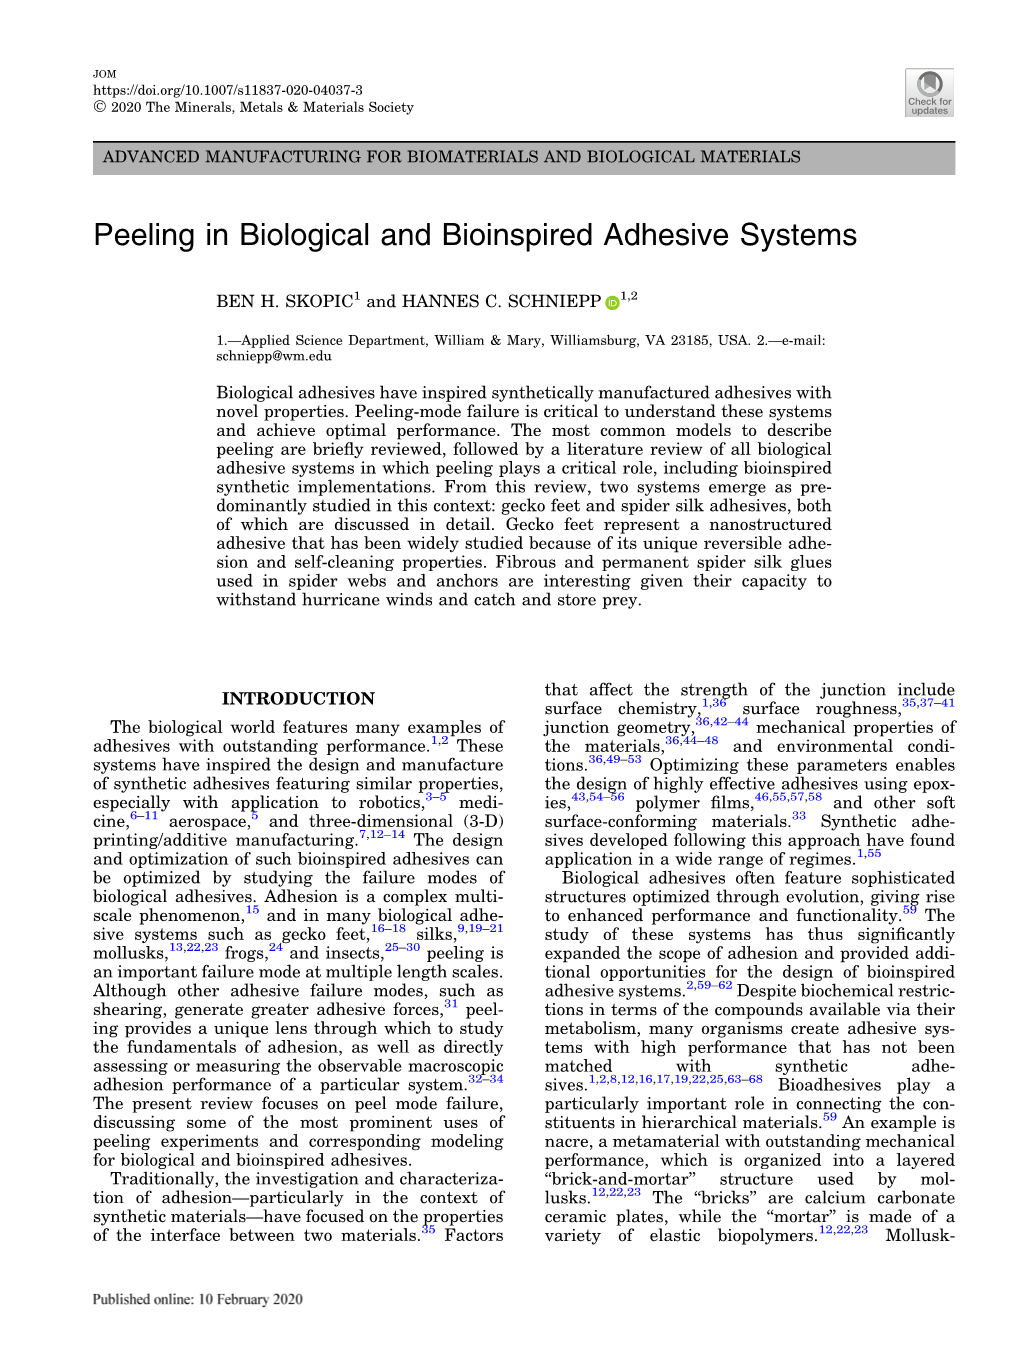 Peeling in Biological and Bioinspired Adhesive Systems